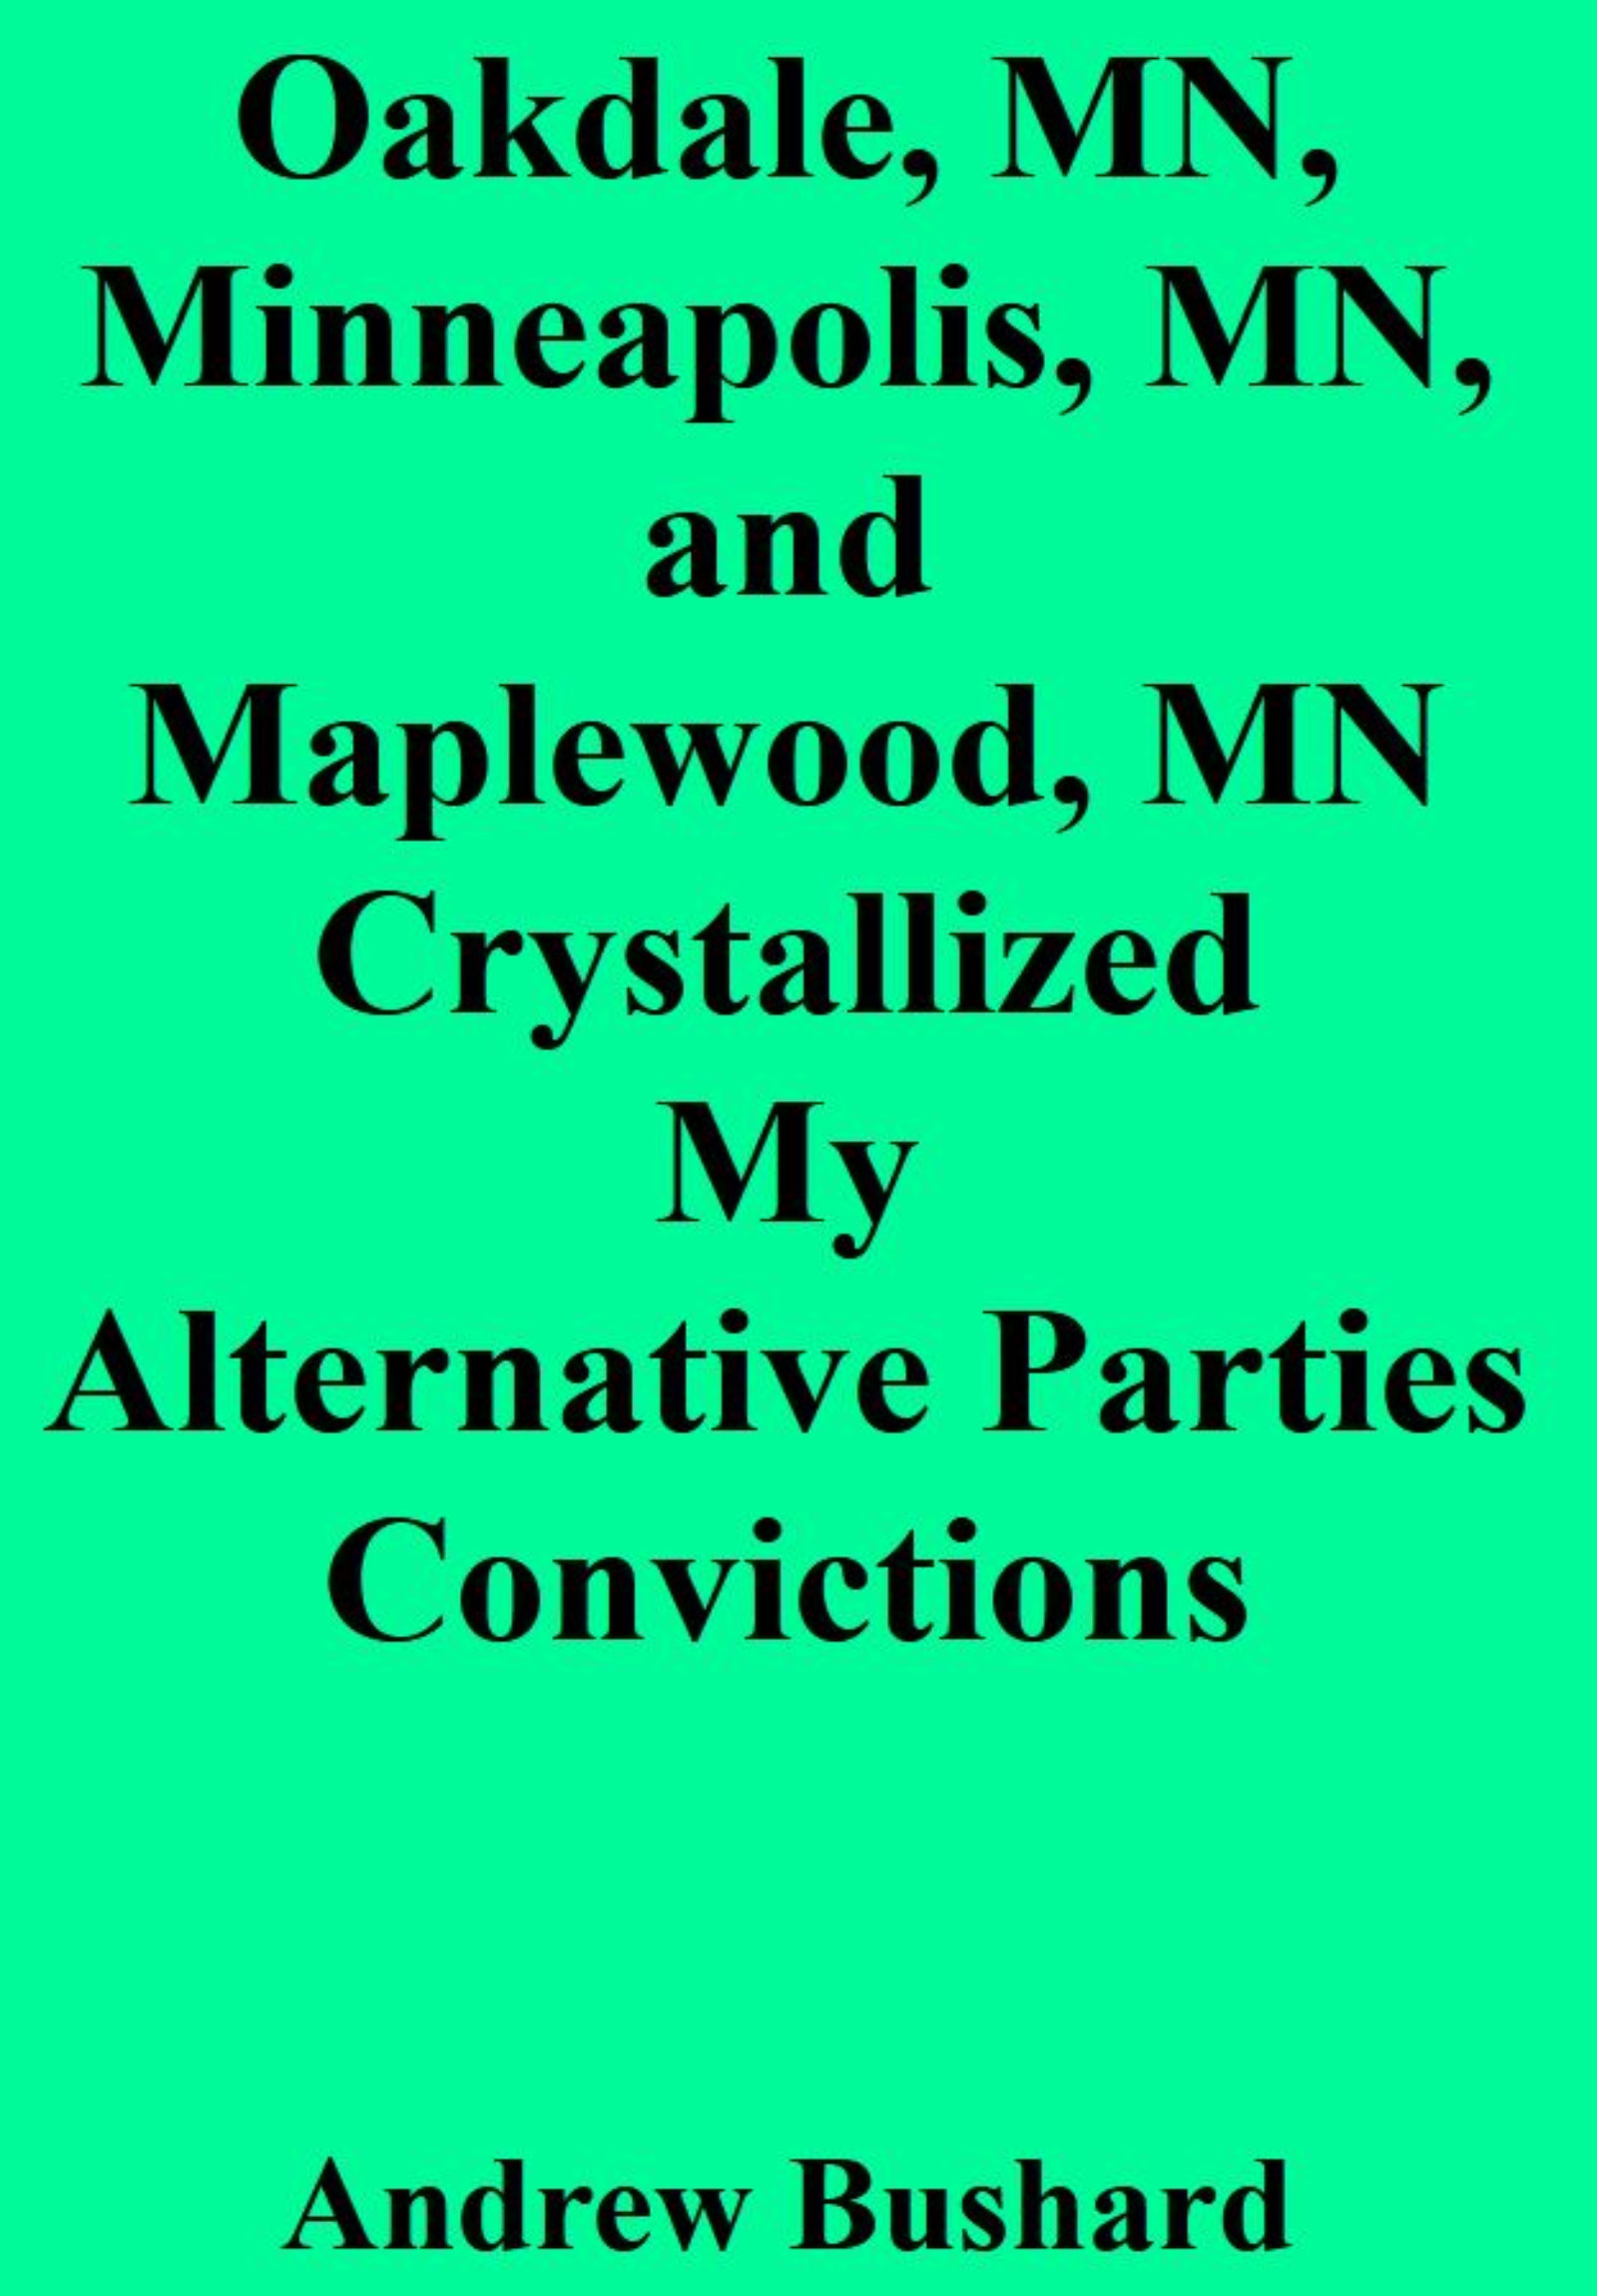 Oakdale, MN, Minneapolis, MN, and Maplewood, MN Crystallized My Alternative Parties Convictions's featured image